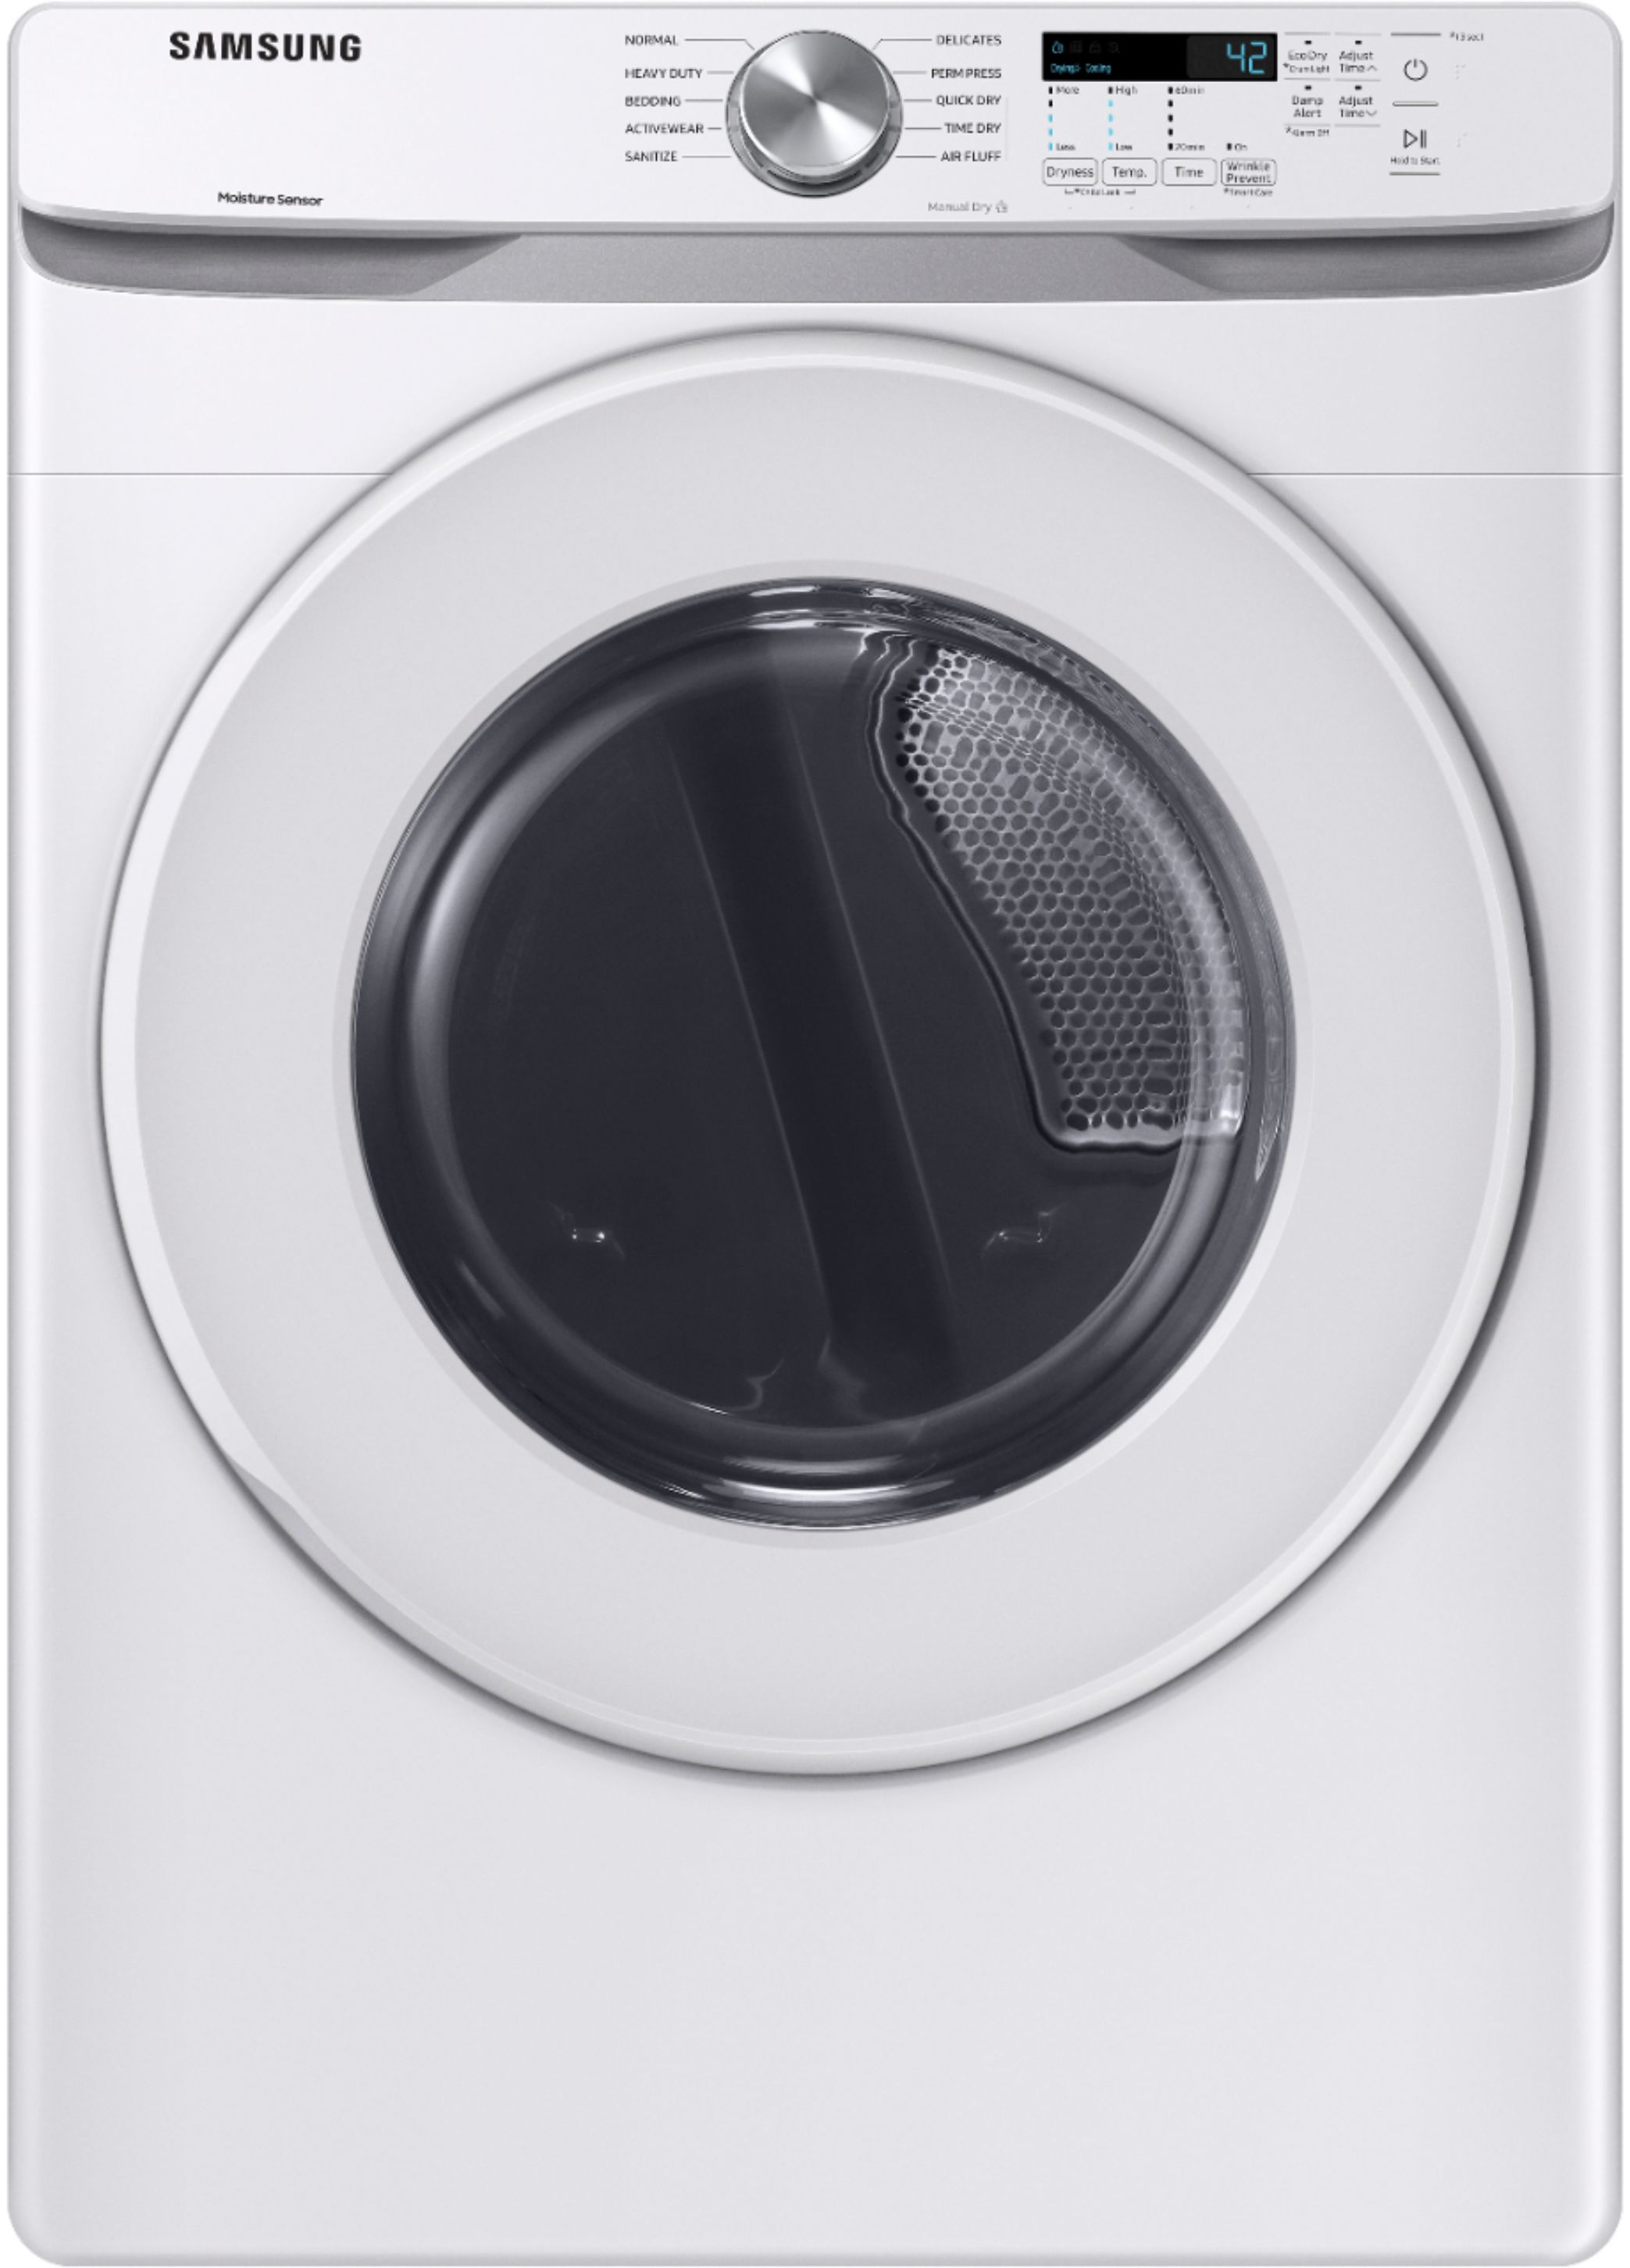 Samsung 7.5 Cu. ft. Front Load Electric Dryer - White